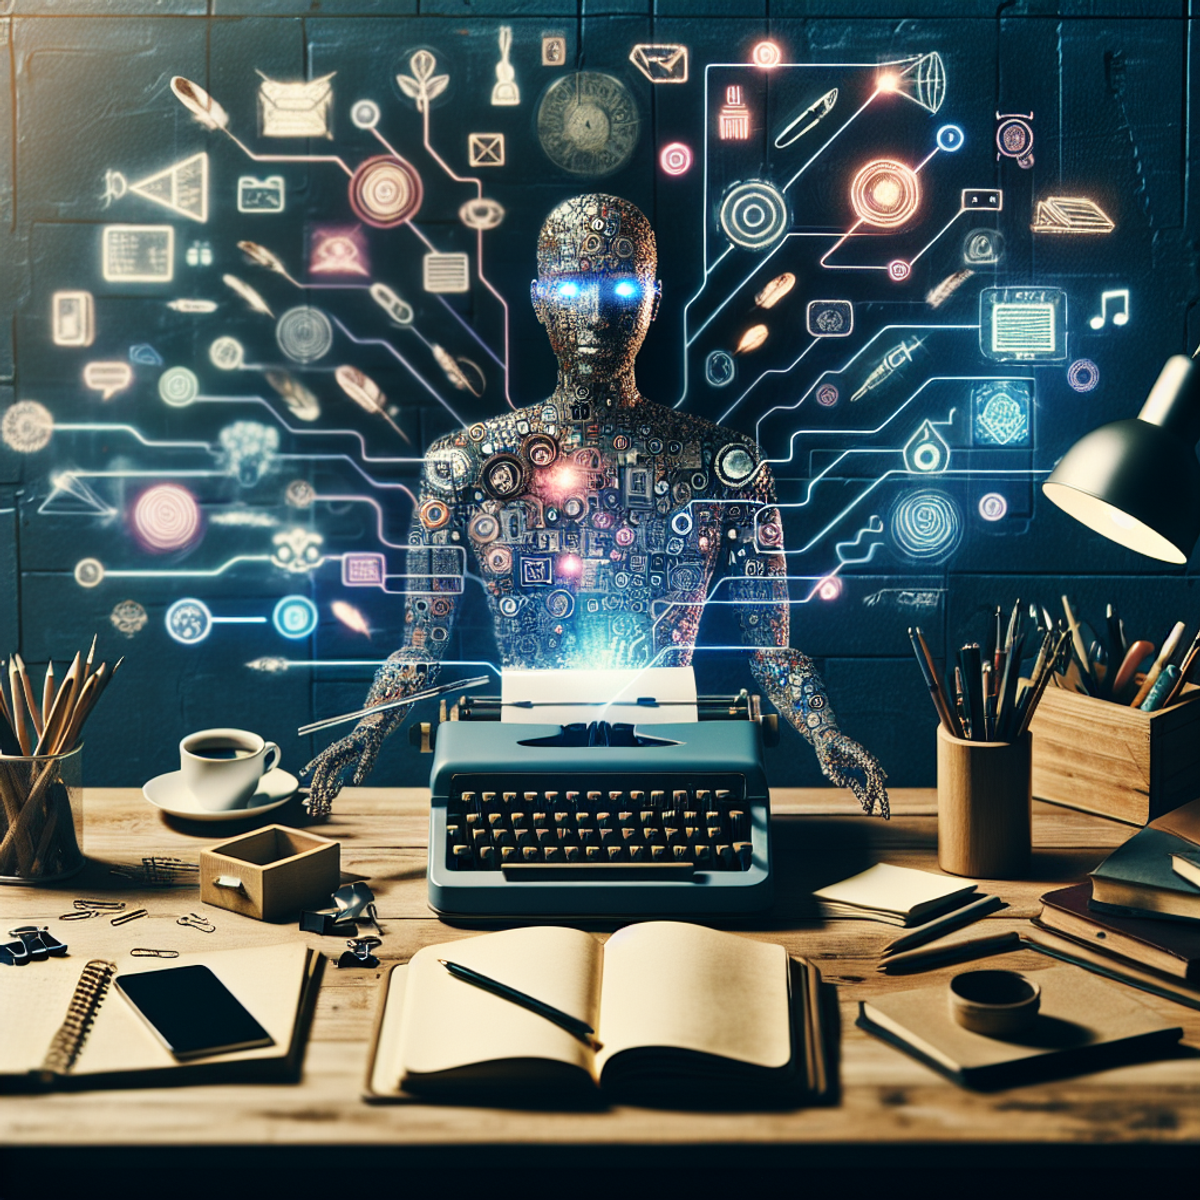 A desk with various stationery items, a typewriter, and a lamp. Above the desk is a futuristic AI assistant surrounded by abstract symbols and elements.